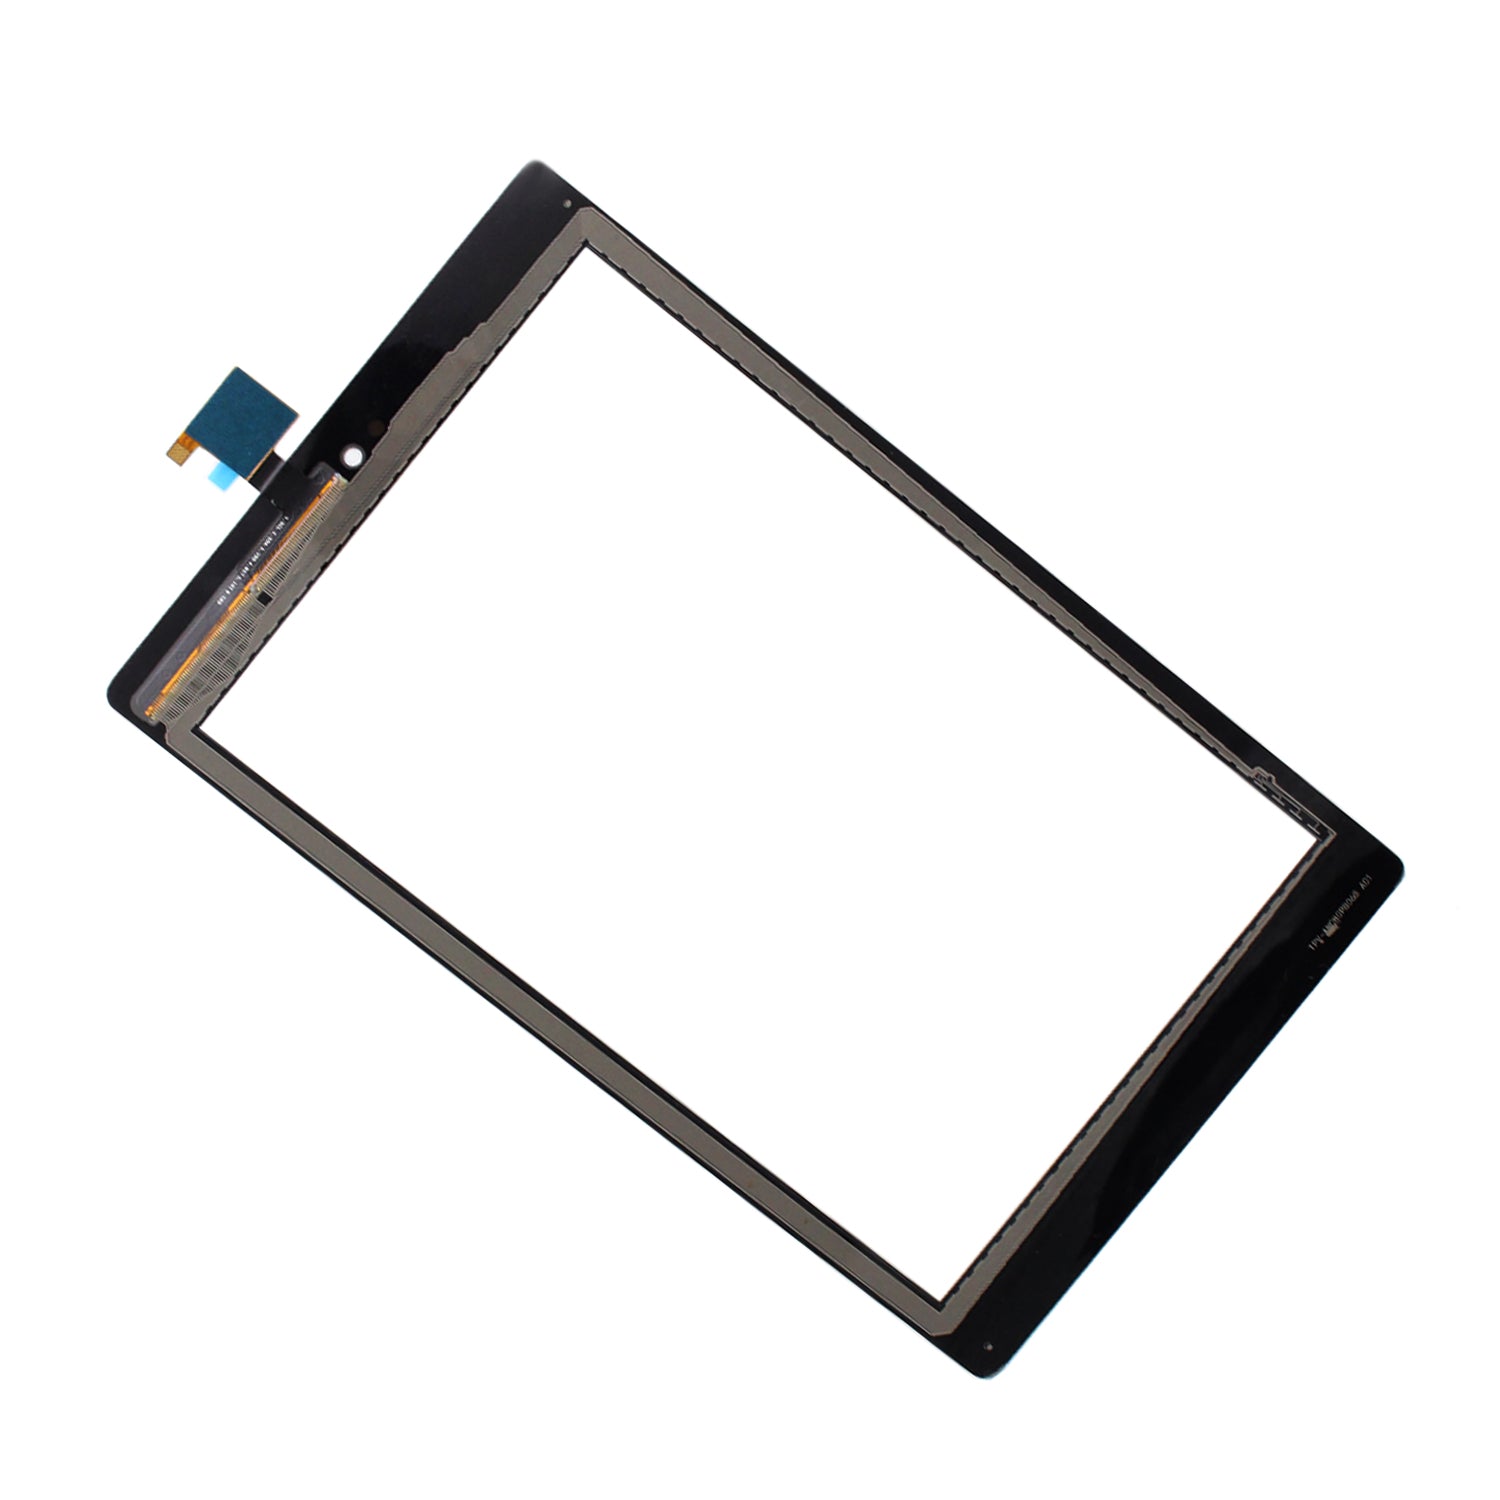 S-Union New Replacement Touch Screen Digitizer for Amazon Kindle Fire HD8 HD 8 8th Gen 2018 L5S83A 8 Inch（no LCD）